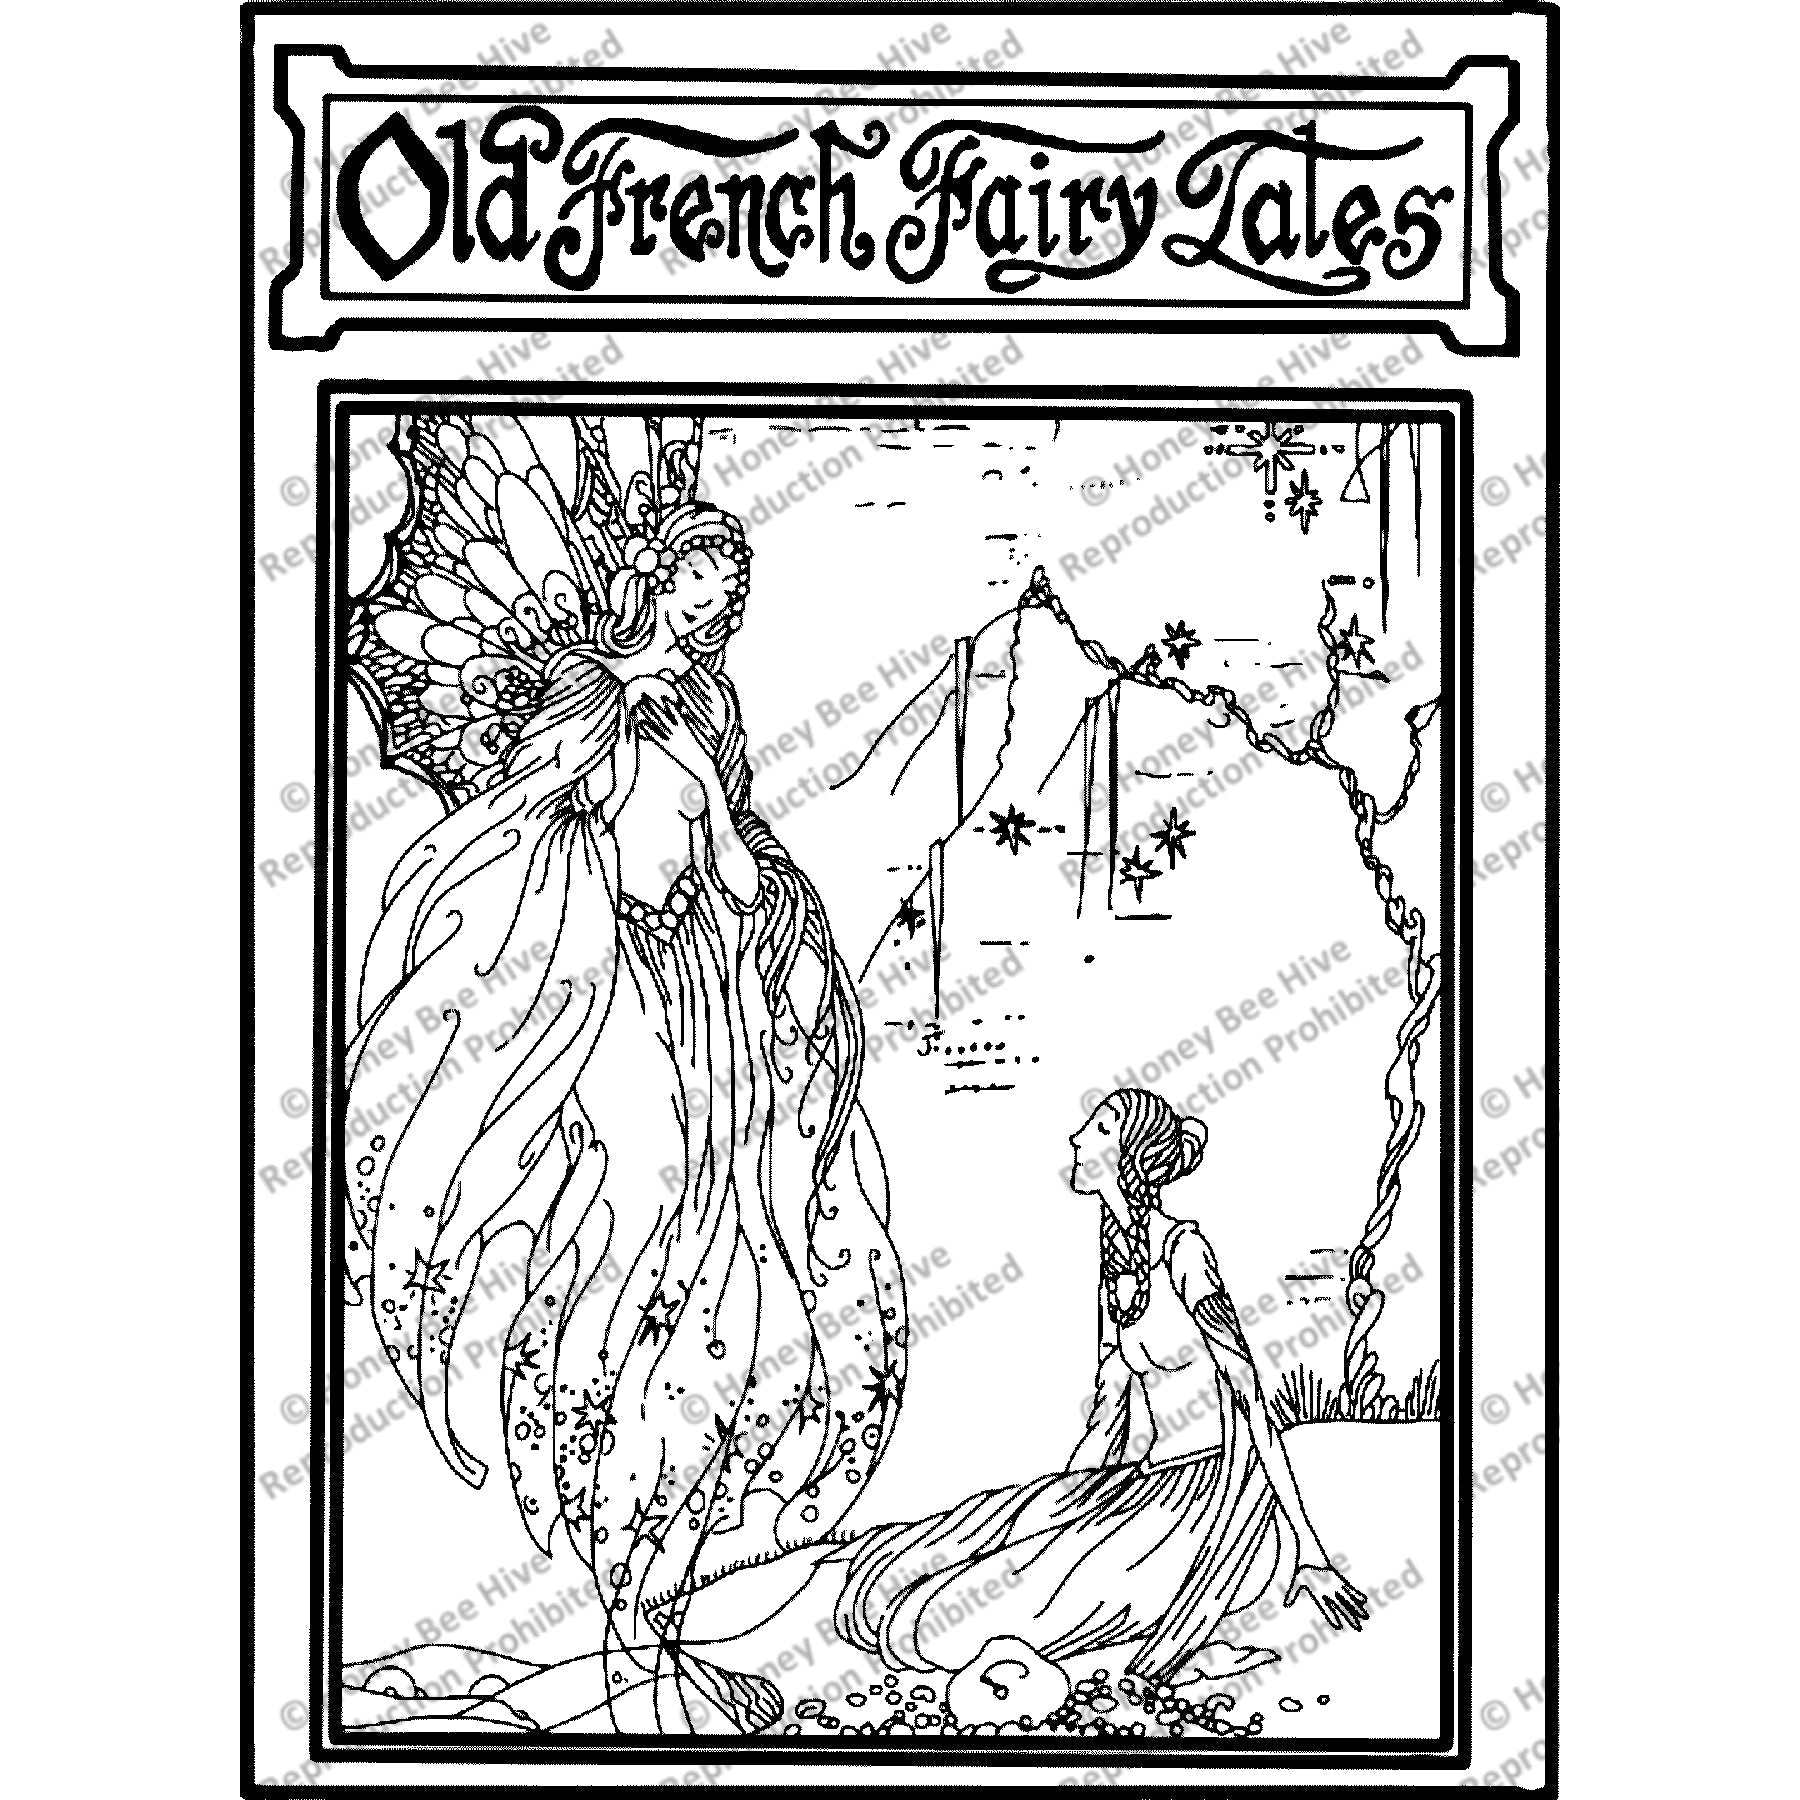 Old French Fairy Tales Book Cover ill. Virginia Frances Sterrett, 1920, rug hooking pattern